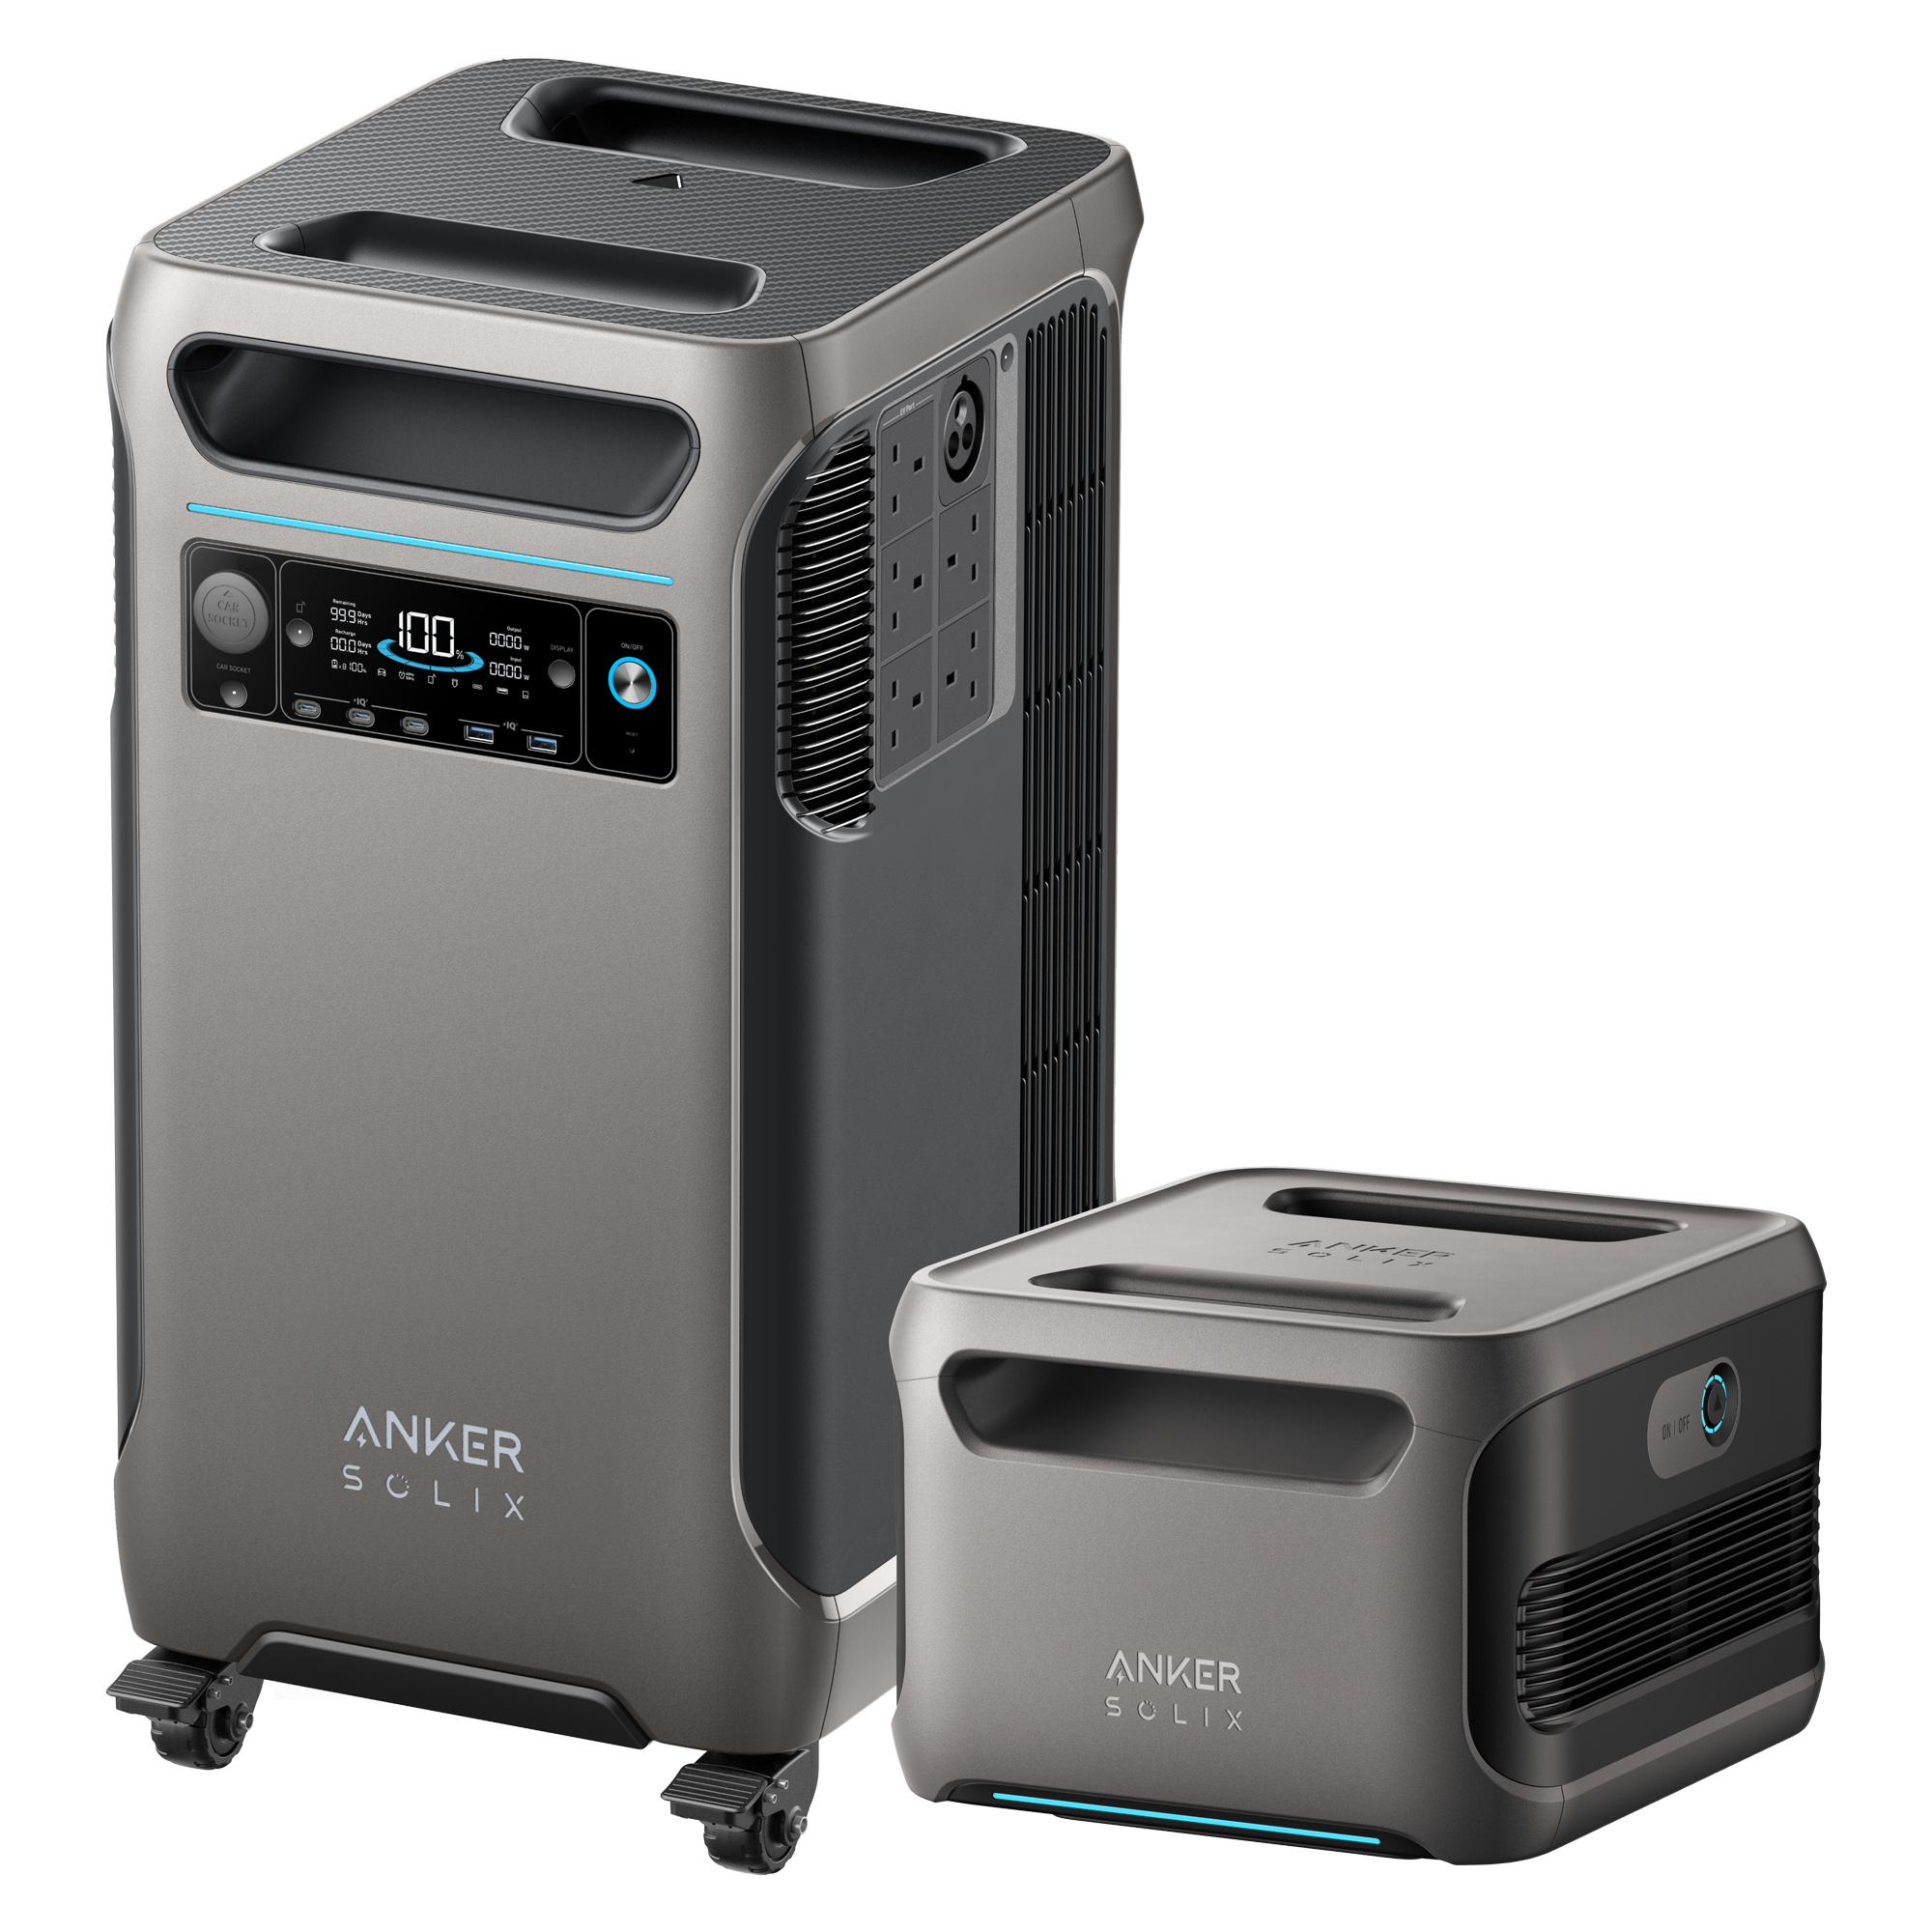 Anker SOLIX <b>F3800</b> + Expansion Battery